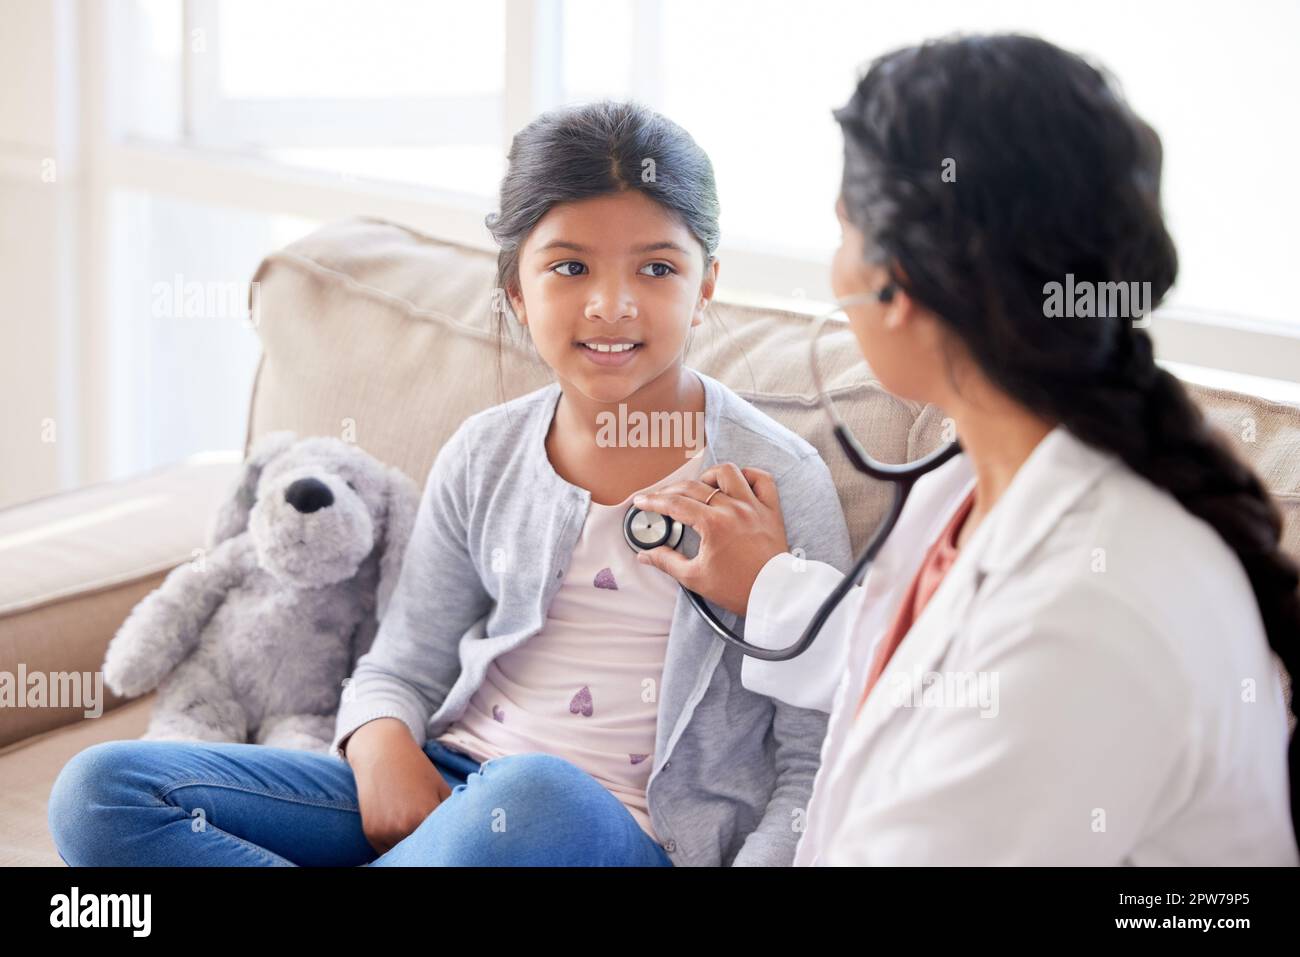 Doctor examining a little girl with stethoscope. Female paediatrician  listening to childs heartbeat during home visit or checkup at clinic.  Caring wom Stock Photo - Alamy